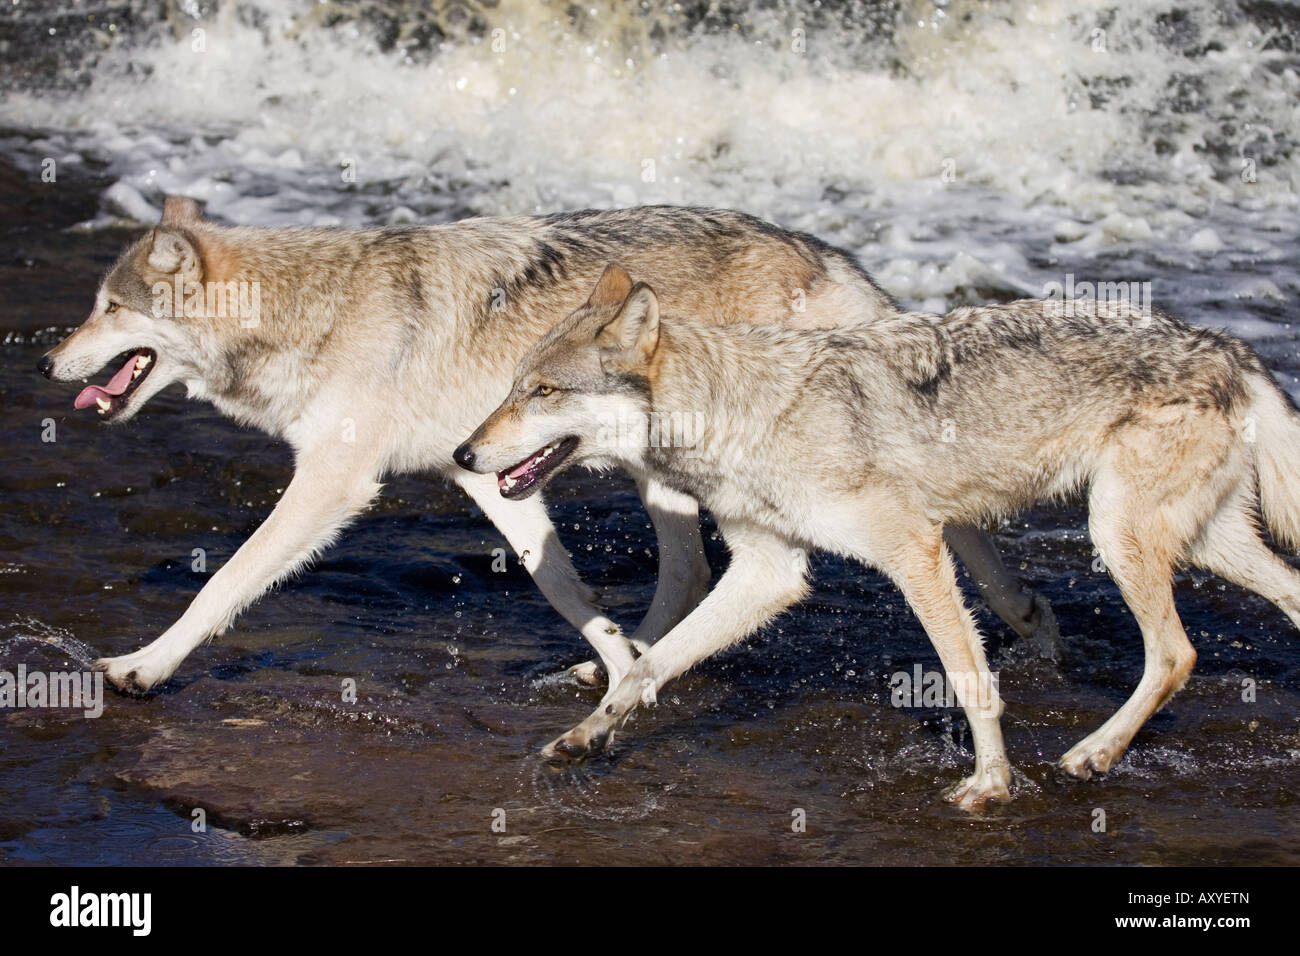 Two gray wolves (Canis lupus) running through water, in captivity, Minnesota Wildlife Connection, Minnesota, USA, North America Stock Photo